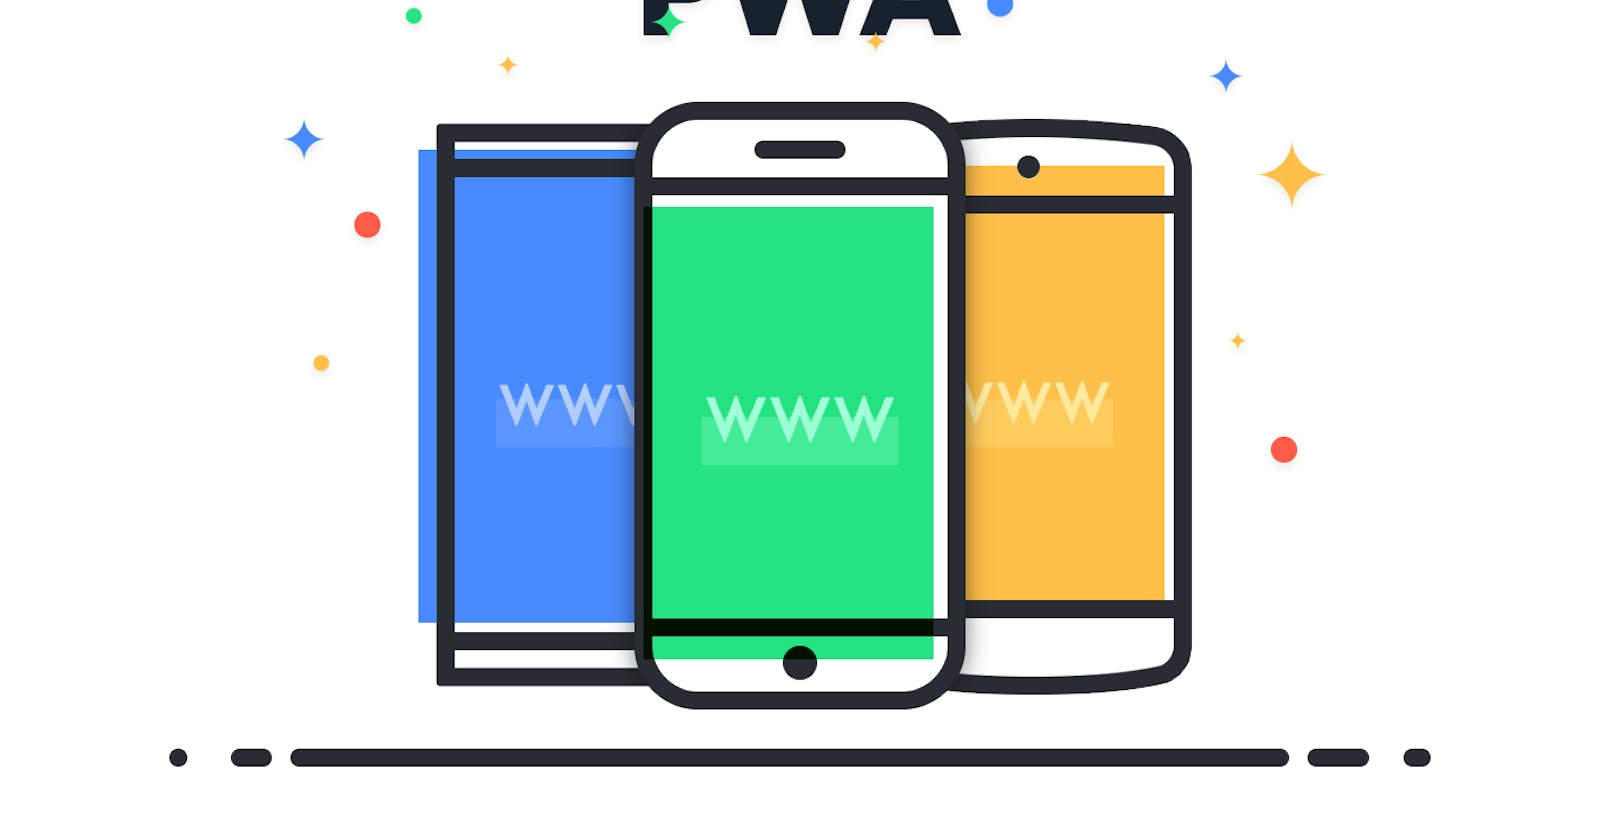 Building Progressive Web Apps (PWAs) with JavaScript: A Step-by-Step Guide